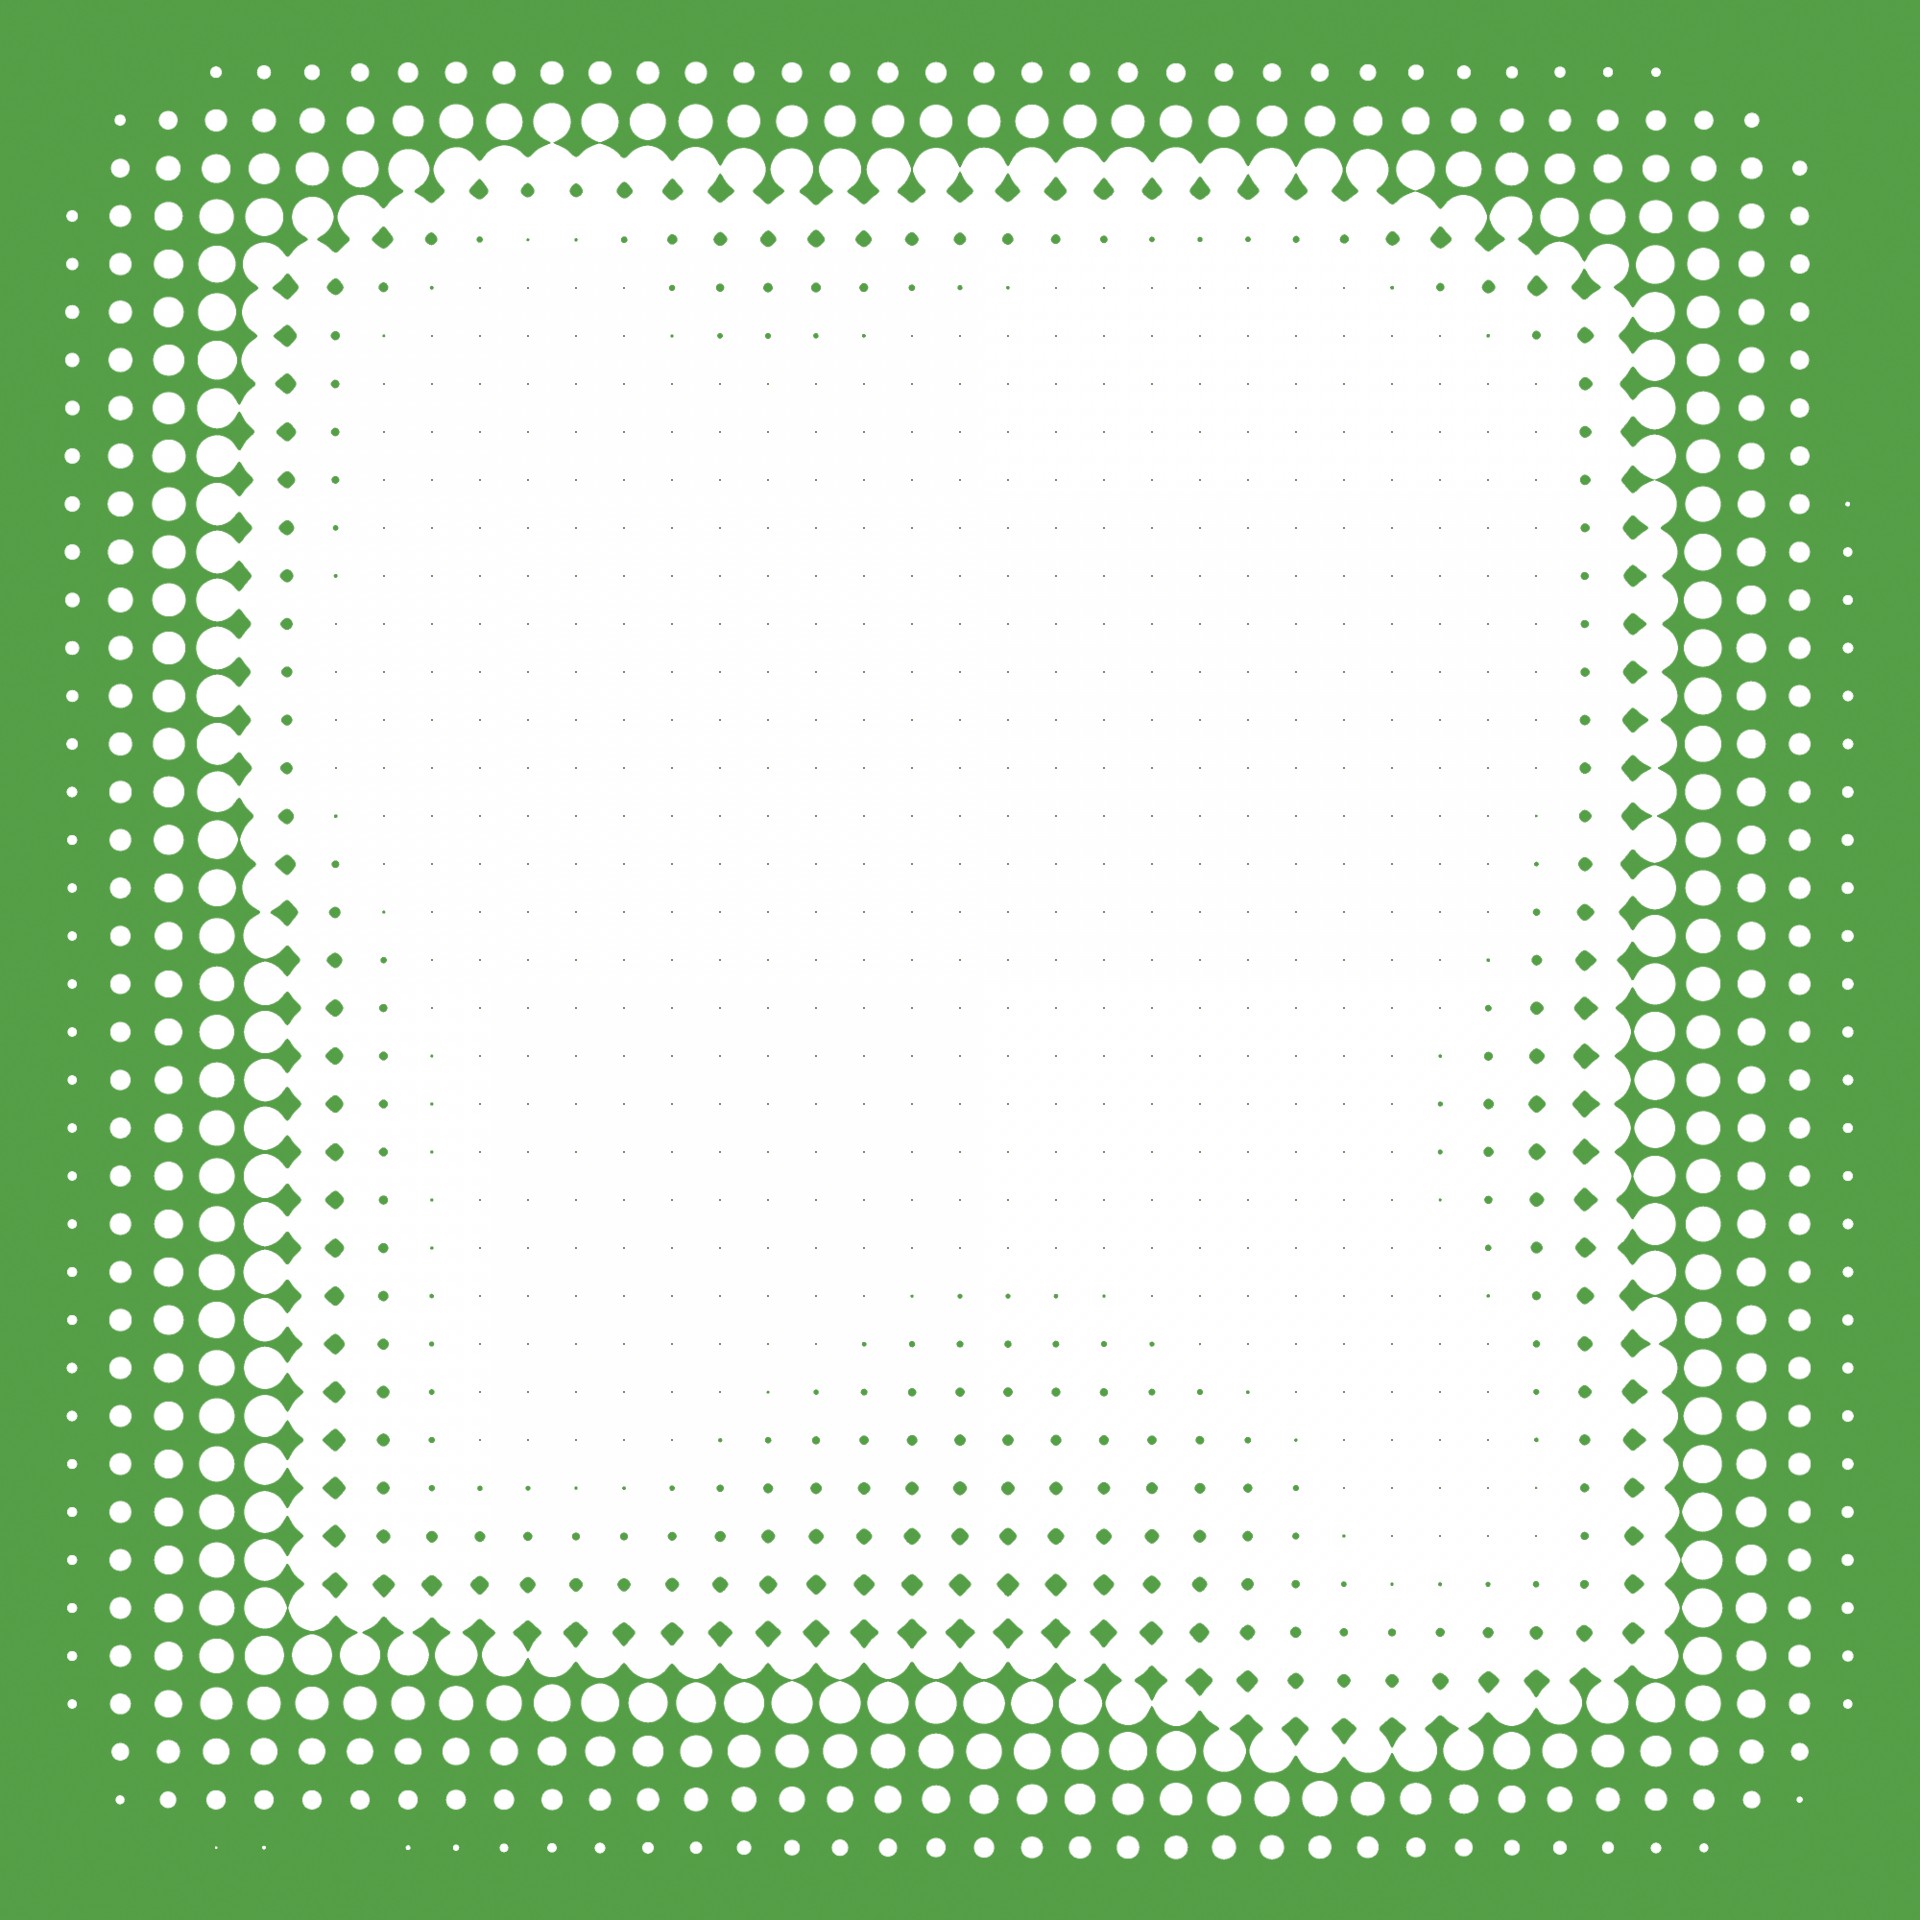 green dotted square free photo